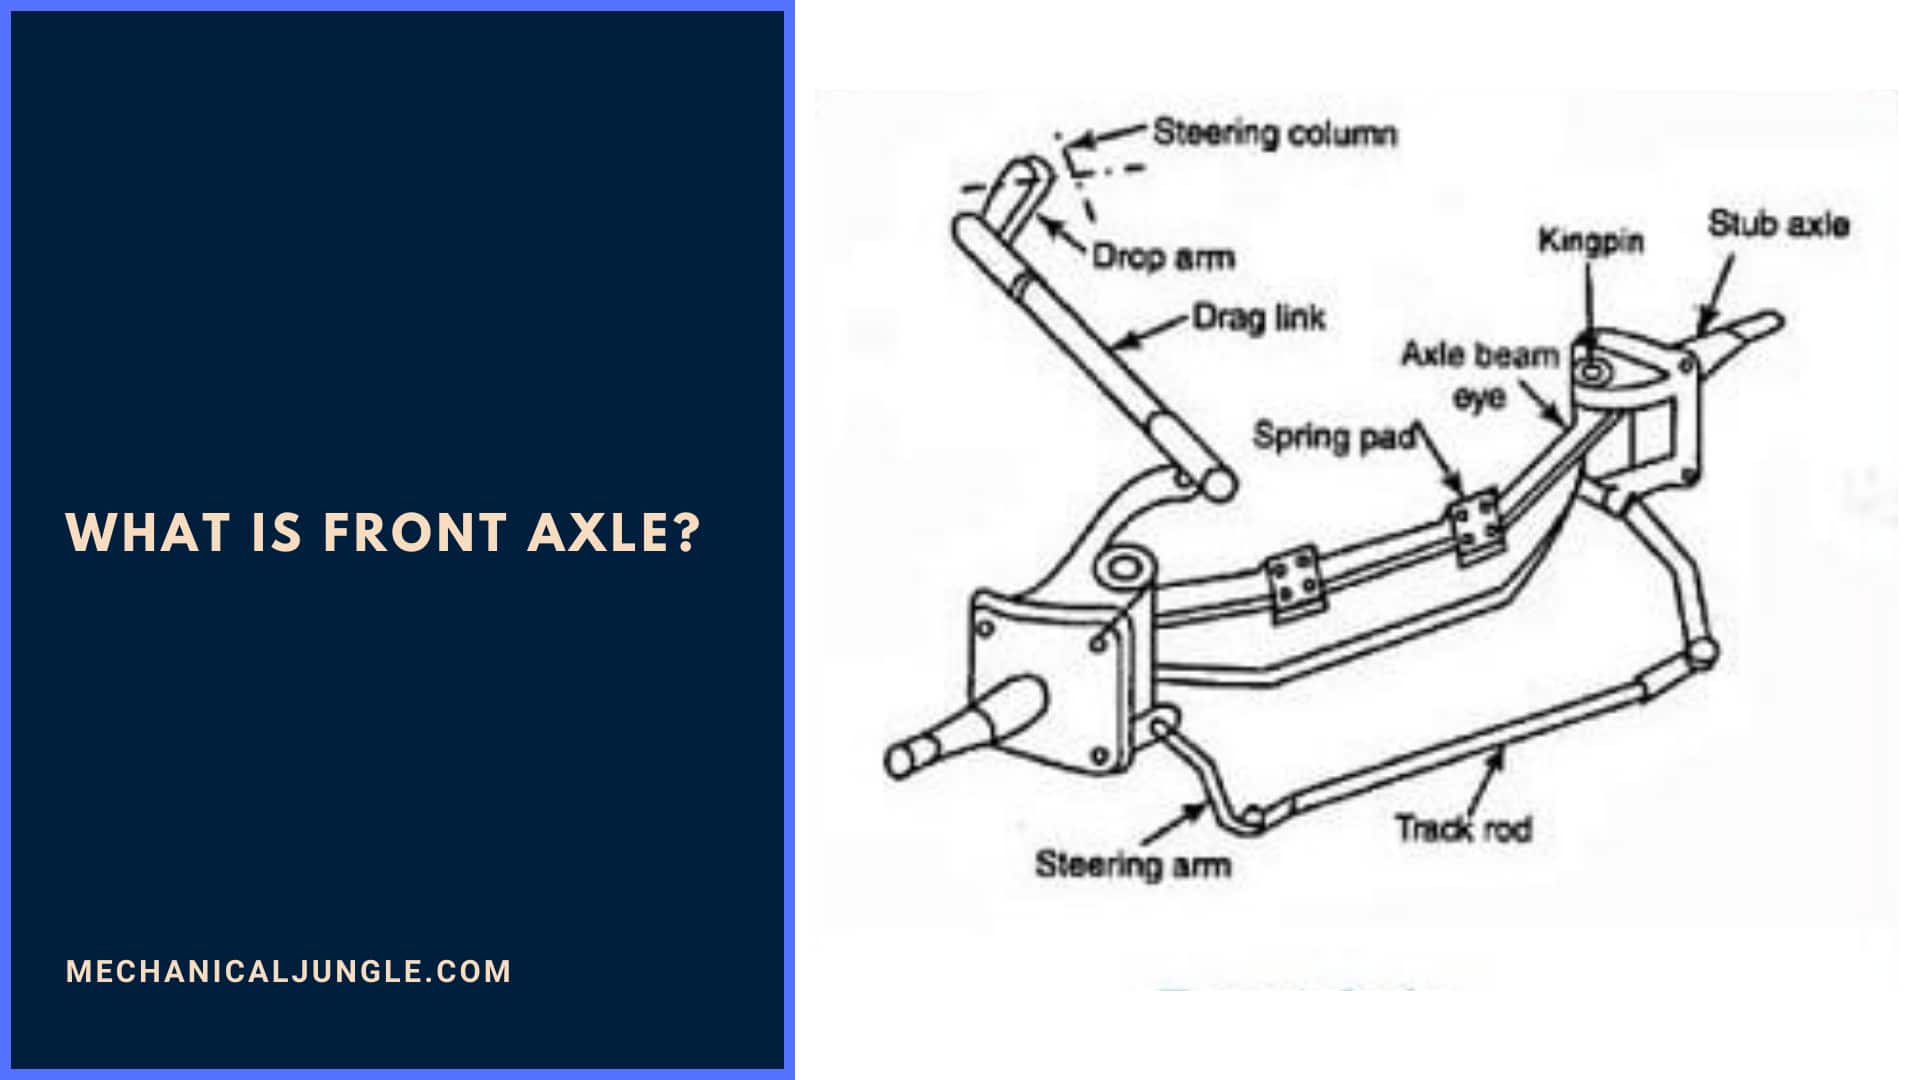 What Is Front Axle?